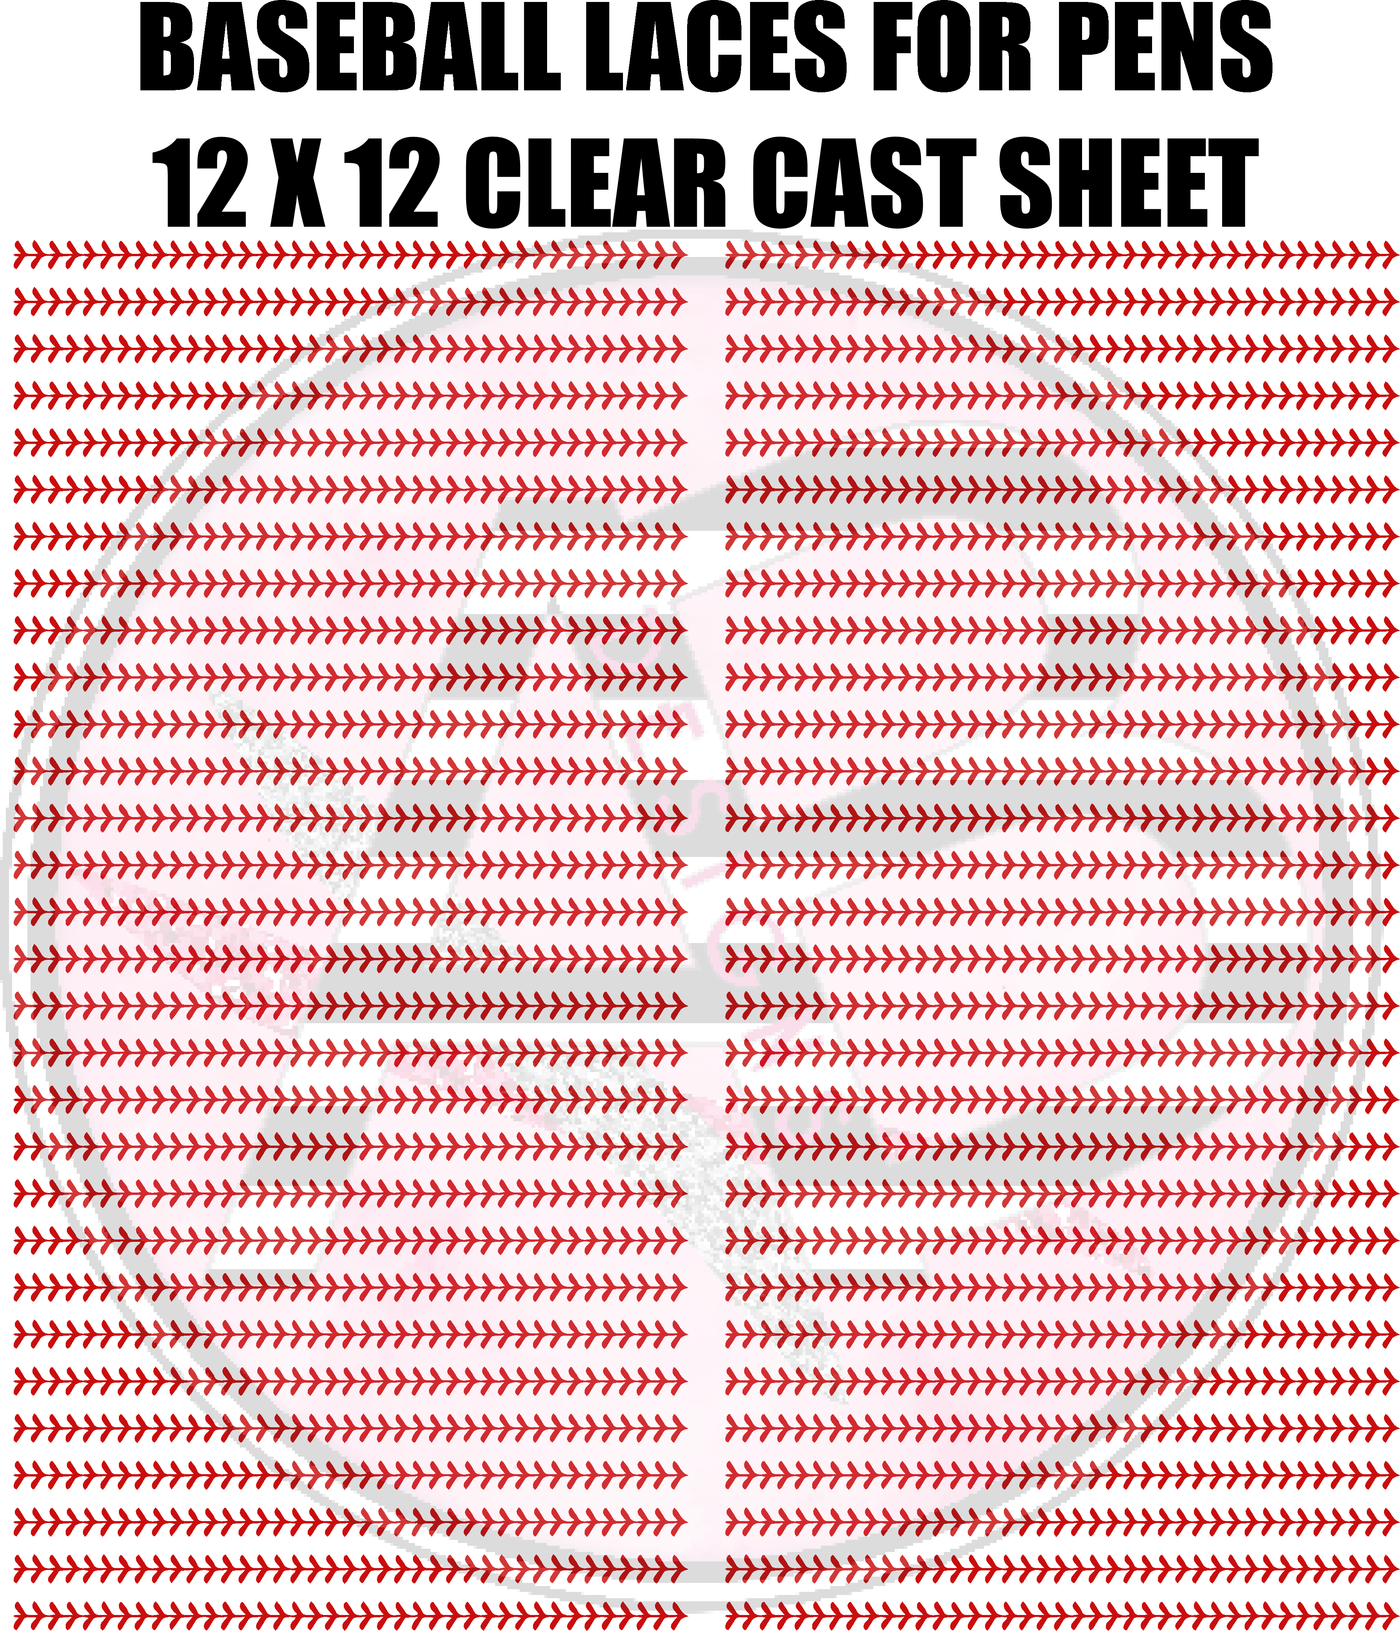 Pen Baseball Laces Full Sheet 12x12 Clear Cast Decal